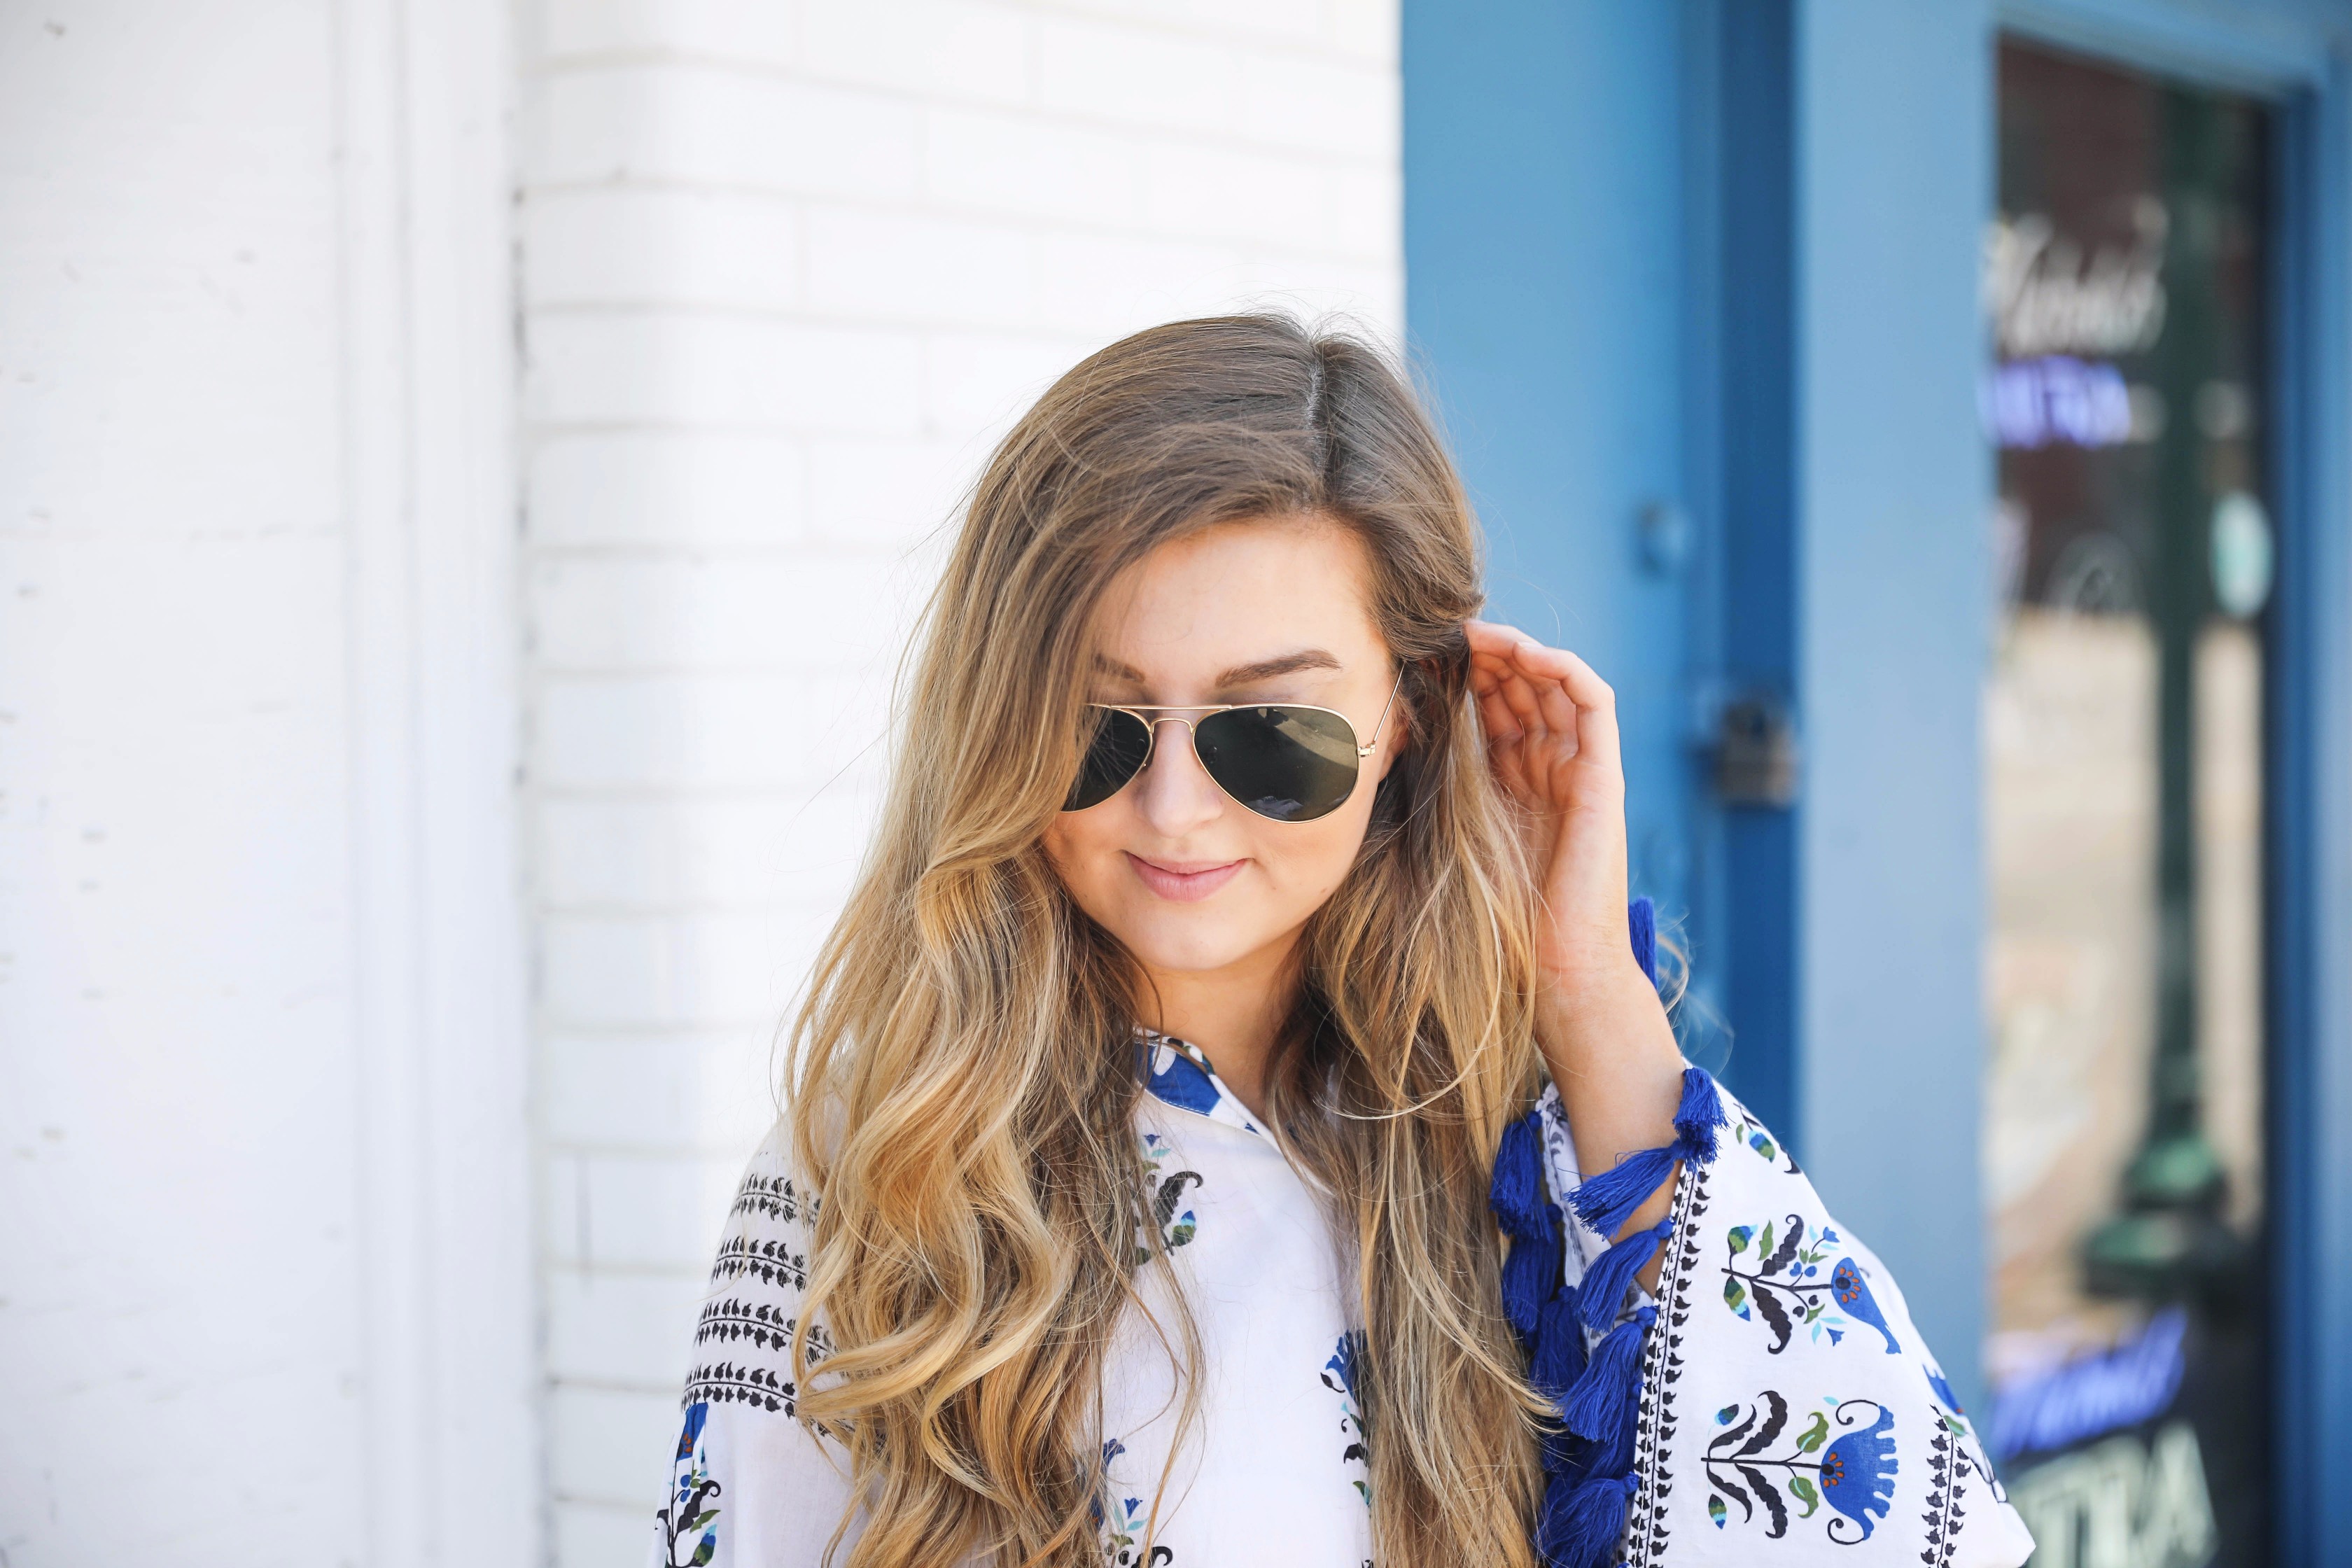 Blue tassel printed tunic summer outfit on fashion blog daily dose of charm by lauren lindmark